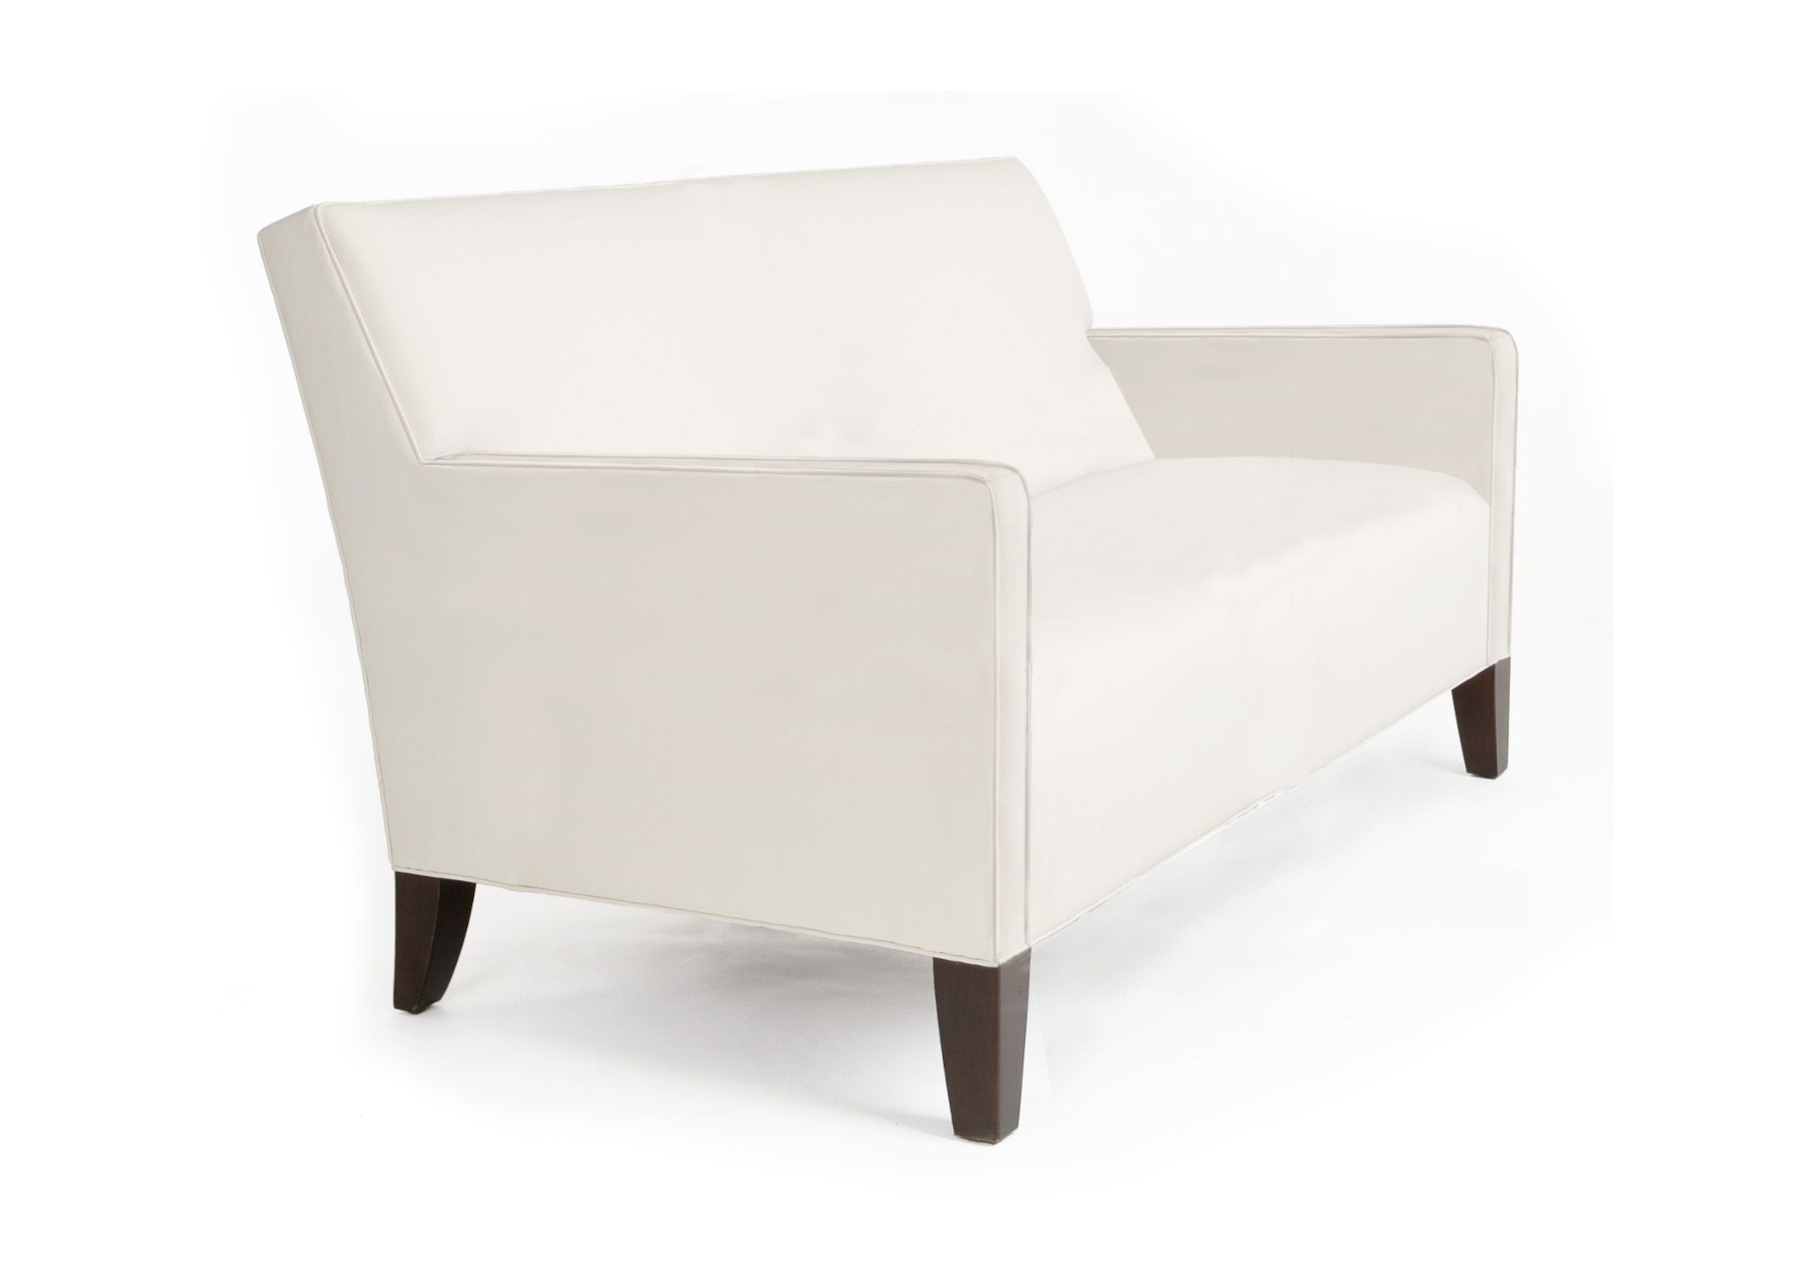 TRANSITION TWO SEAT SOFA